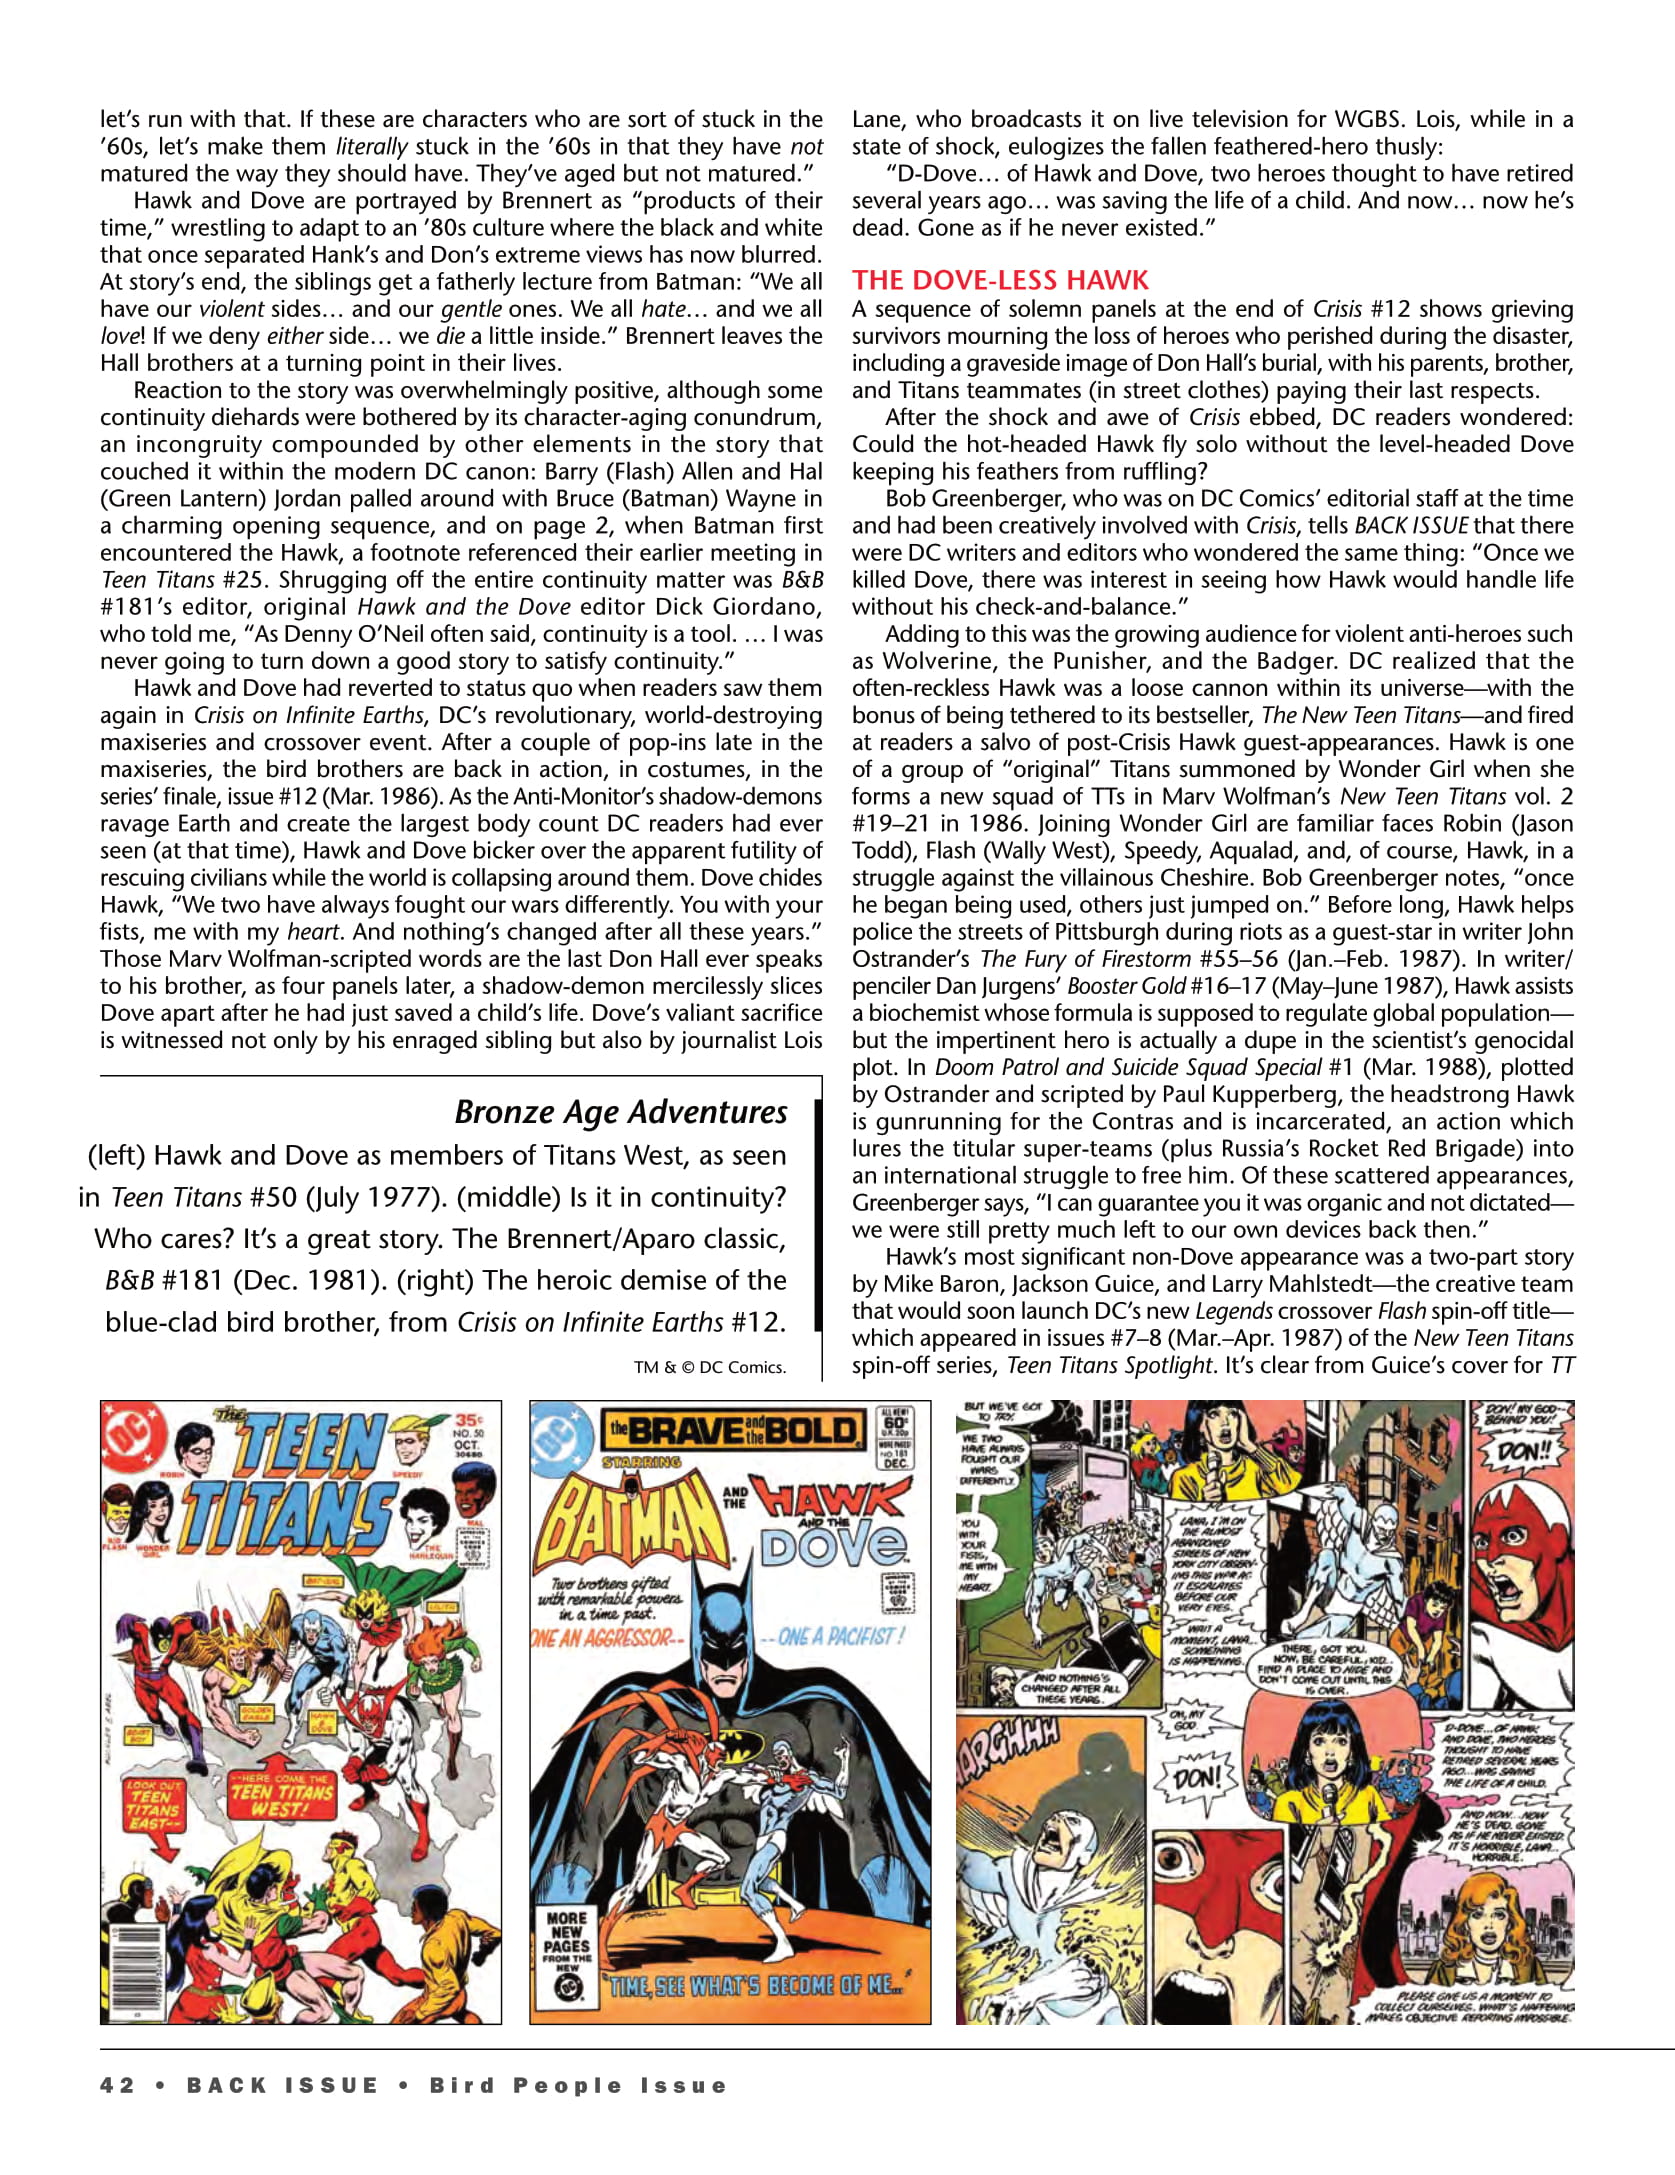 Read online Back Issue comic -  Issue #97 - 44